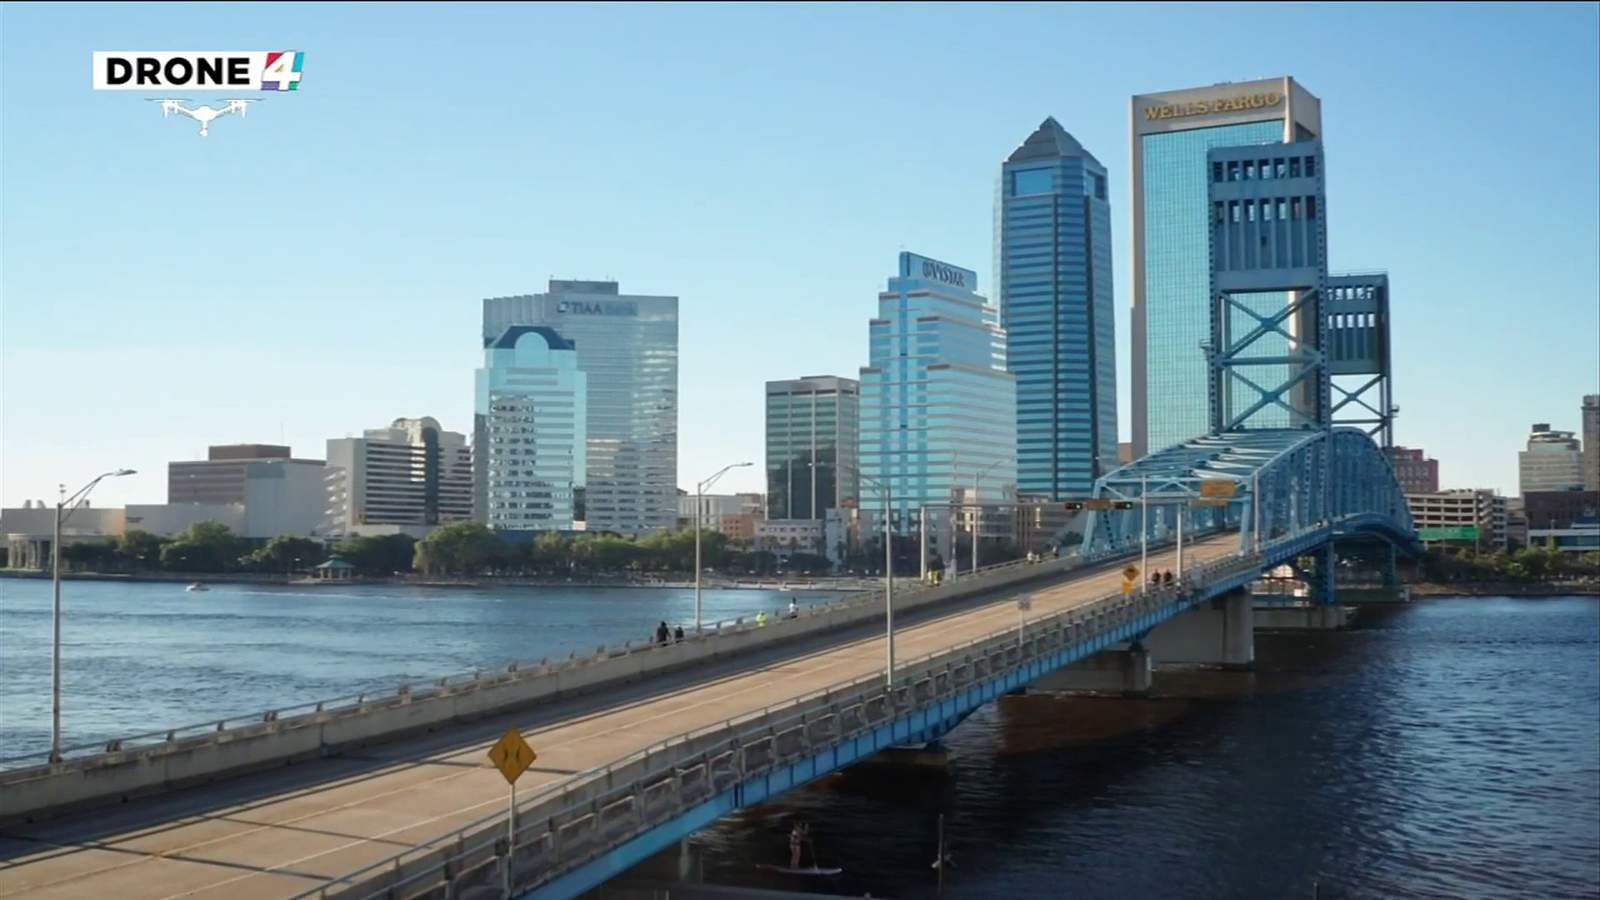 Jacksonville issues mask mandate weeks before Republican National Convention